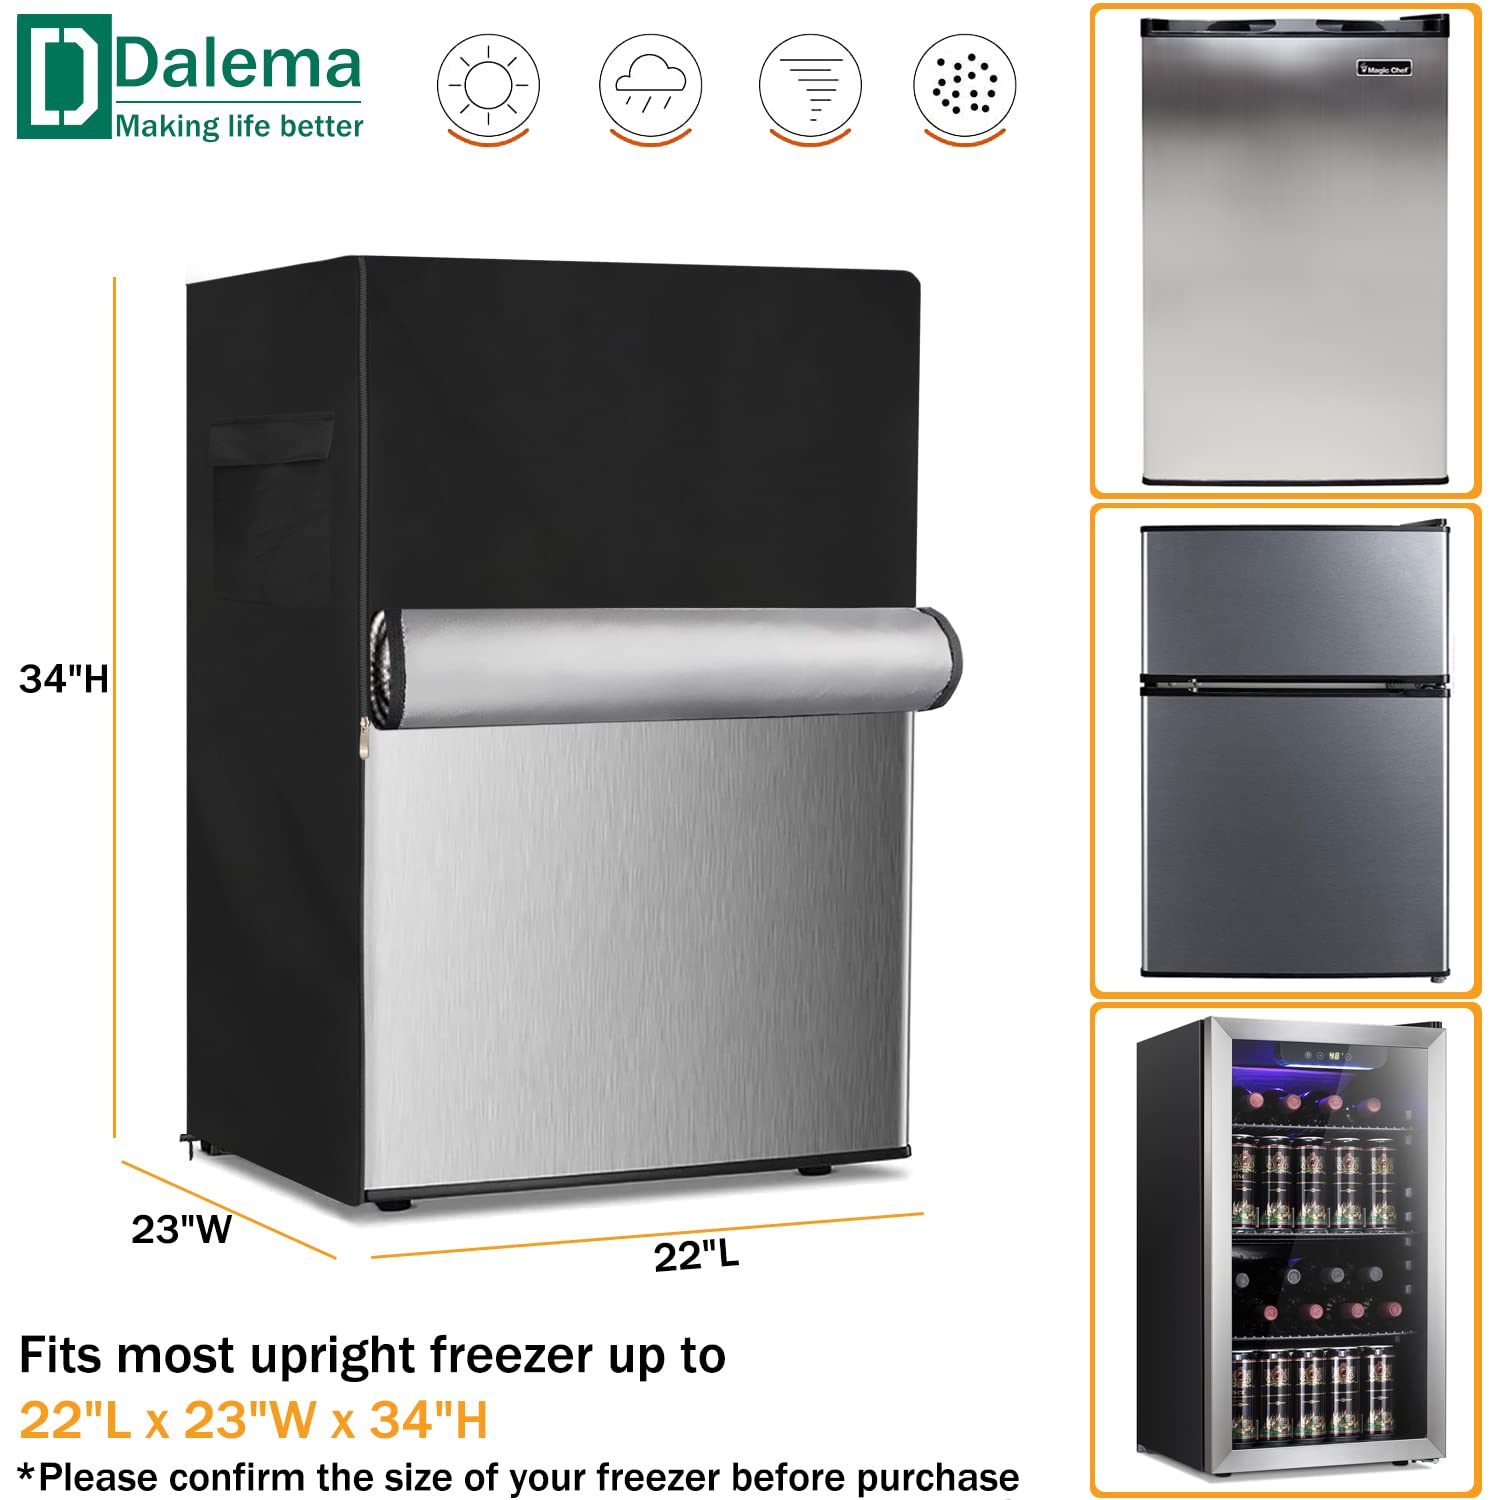 Dalema Upright Freezer Cover,Outdoor Waterproof Upright Refrigerator Cover,Outside 3.0 Cubic Feet Compact Stand Up Fridge Covers.Front Can Be Rolled-Up With Zippers.(Black,22" L x 23" W x 34" H)